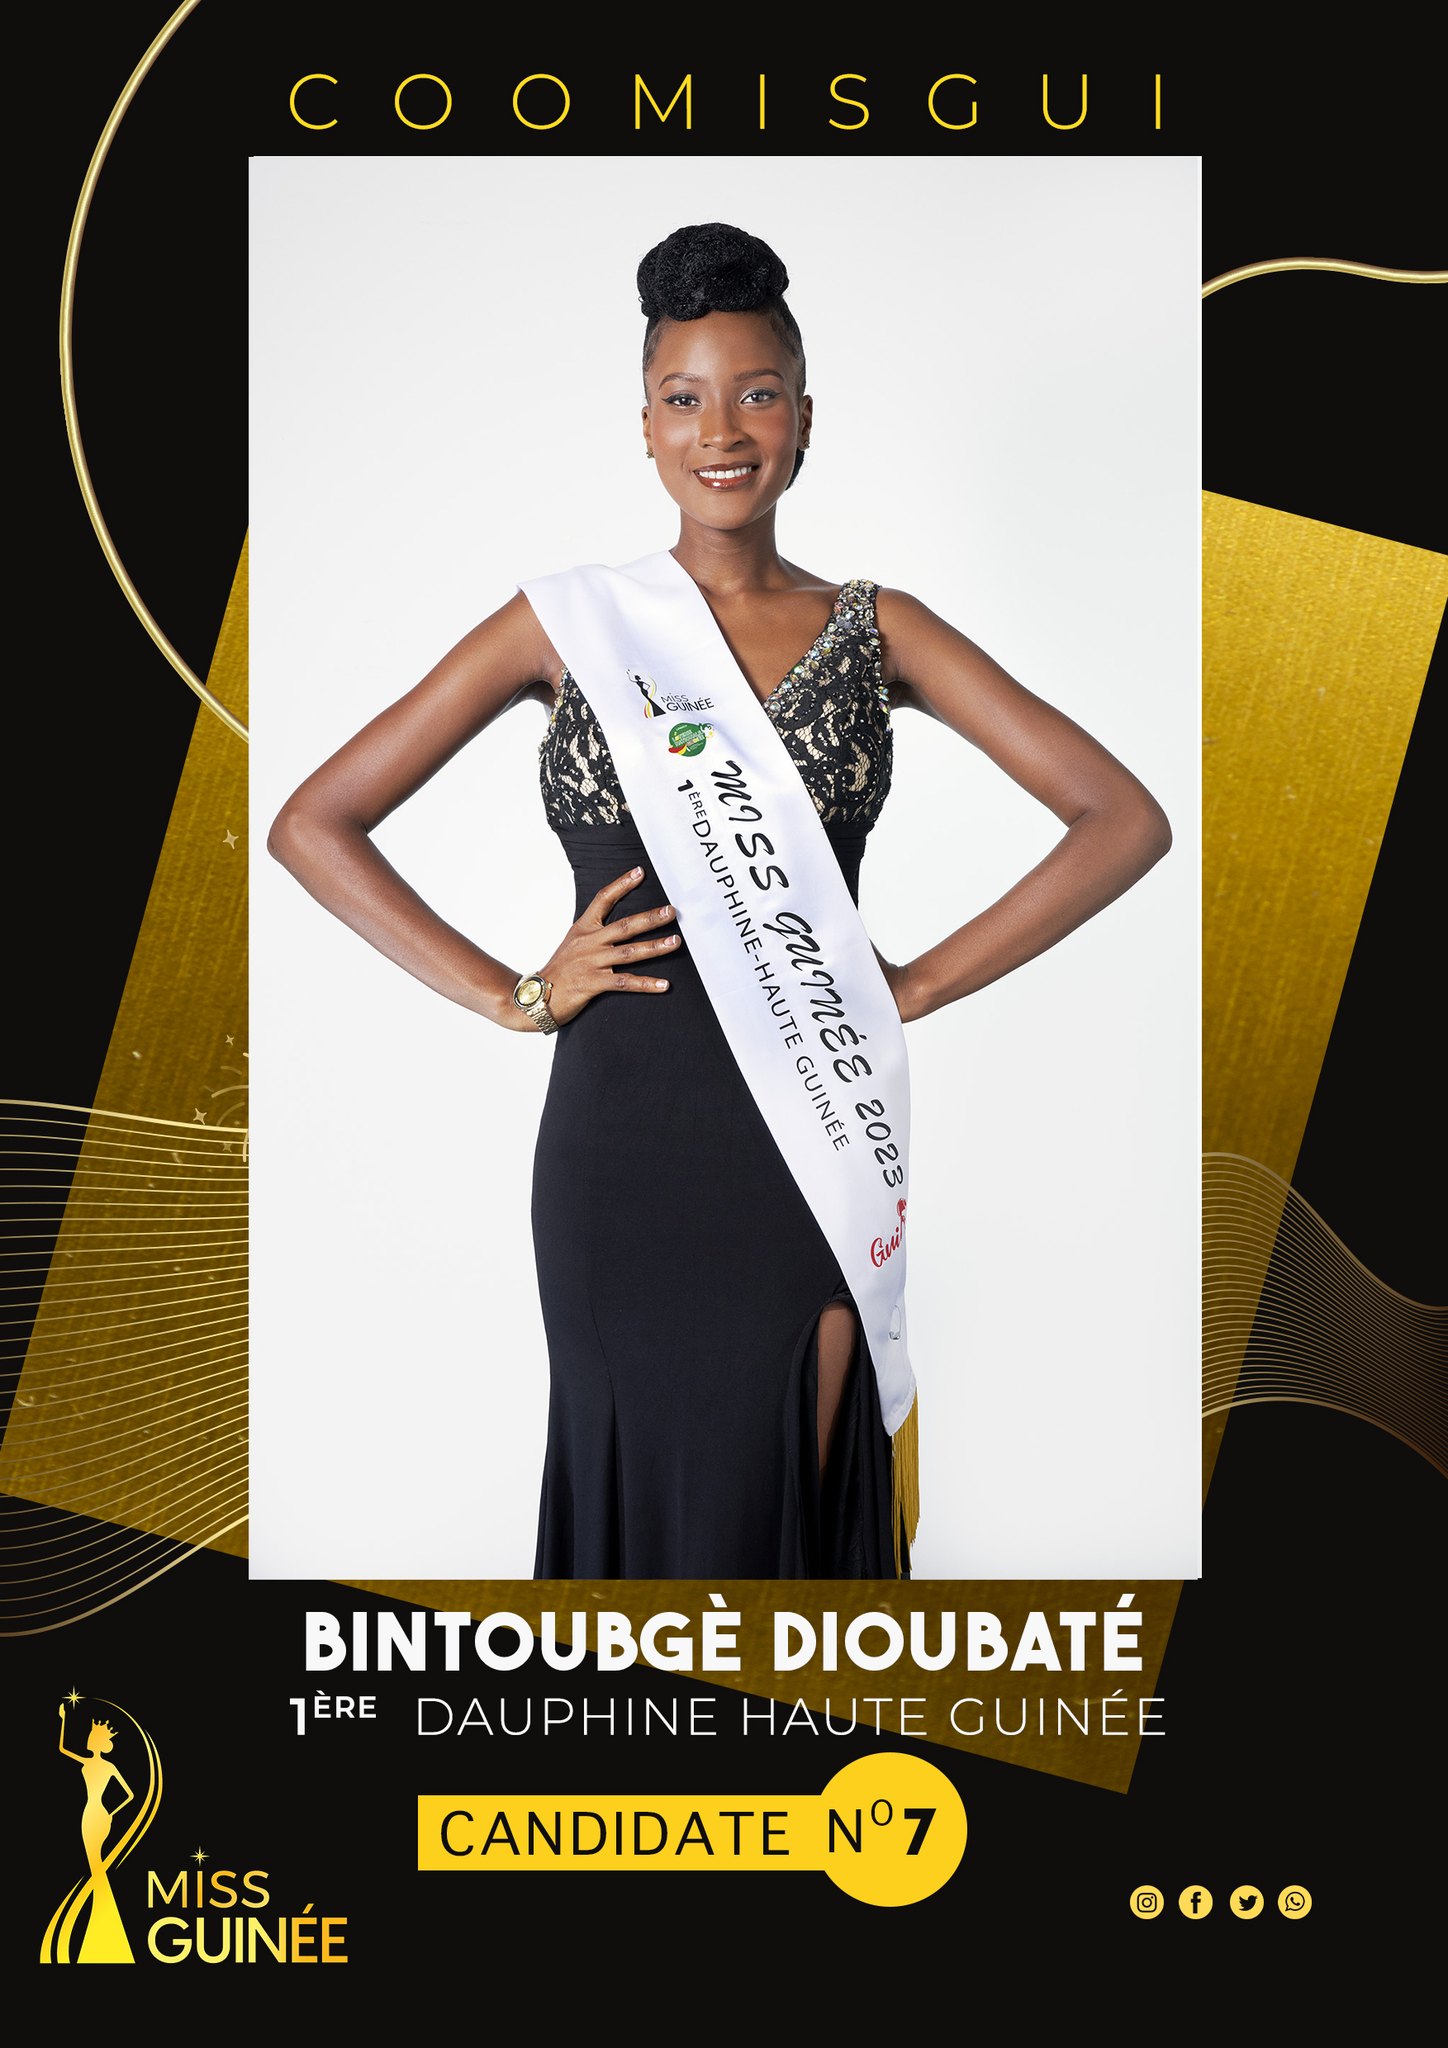 The Comity of COOMISGUI - Mrs AMINATA DIALLO  presents the Finalist of MISS GUINEE 2023  - Miss BINTOUBGE DIOUBATE  - Representing First Runner  Miss Haute GUINEE - CANDIDATE number 7 - DN-AFRICA Media Partner